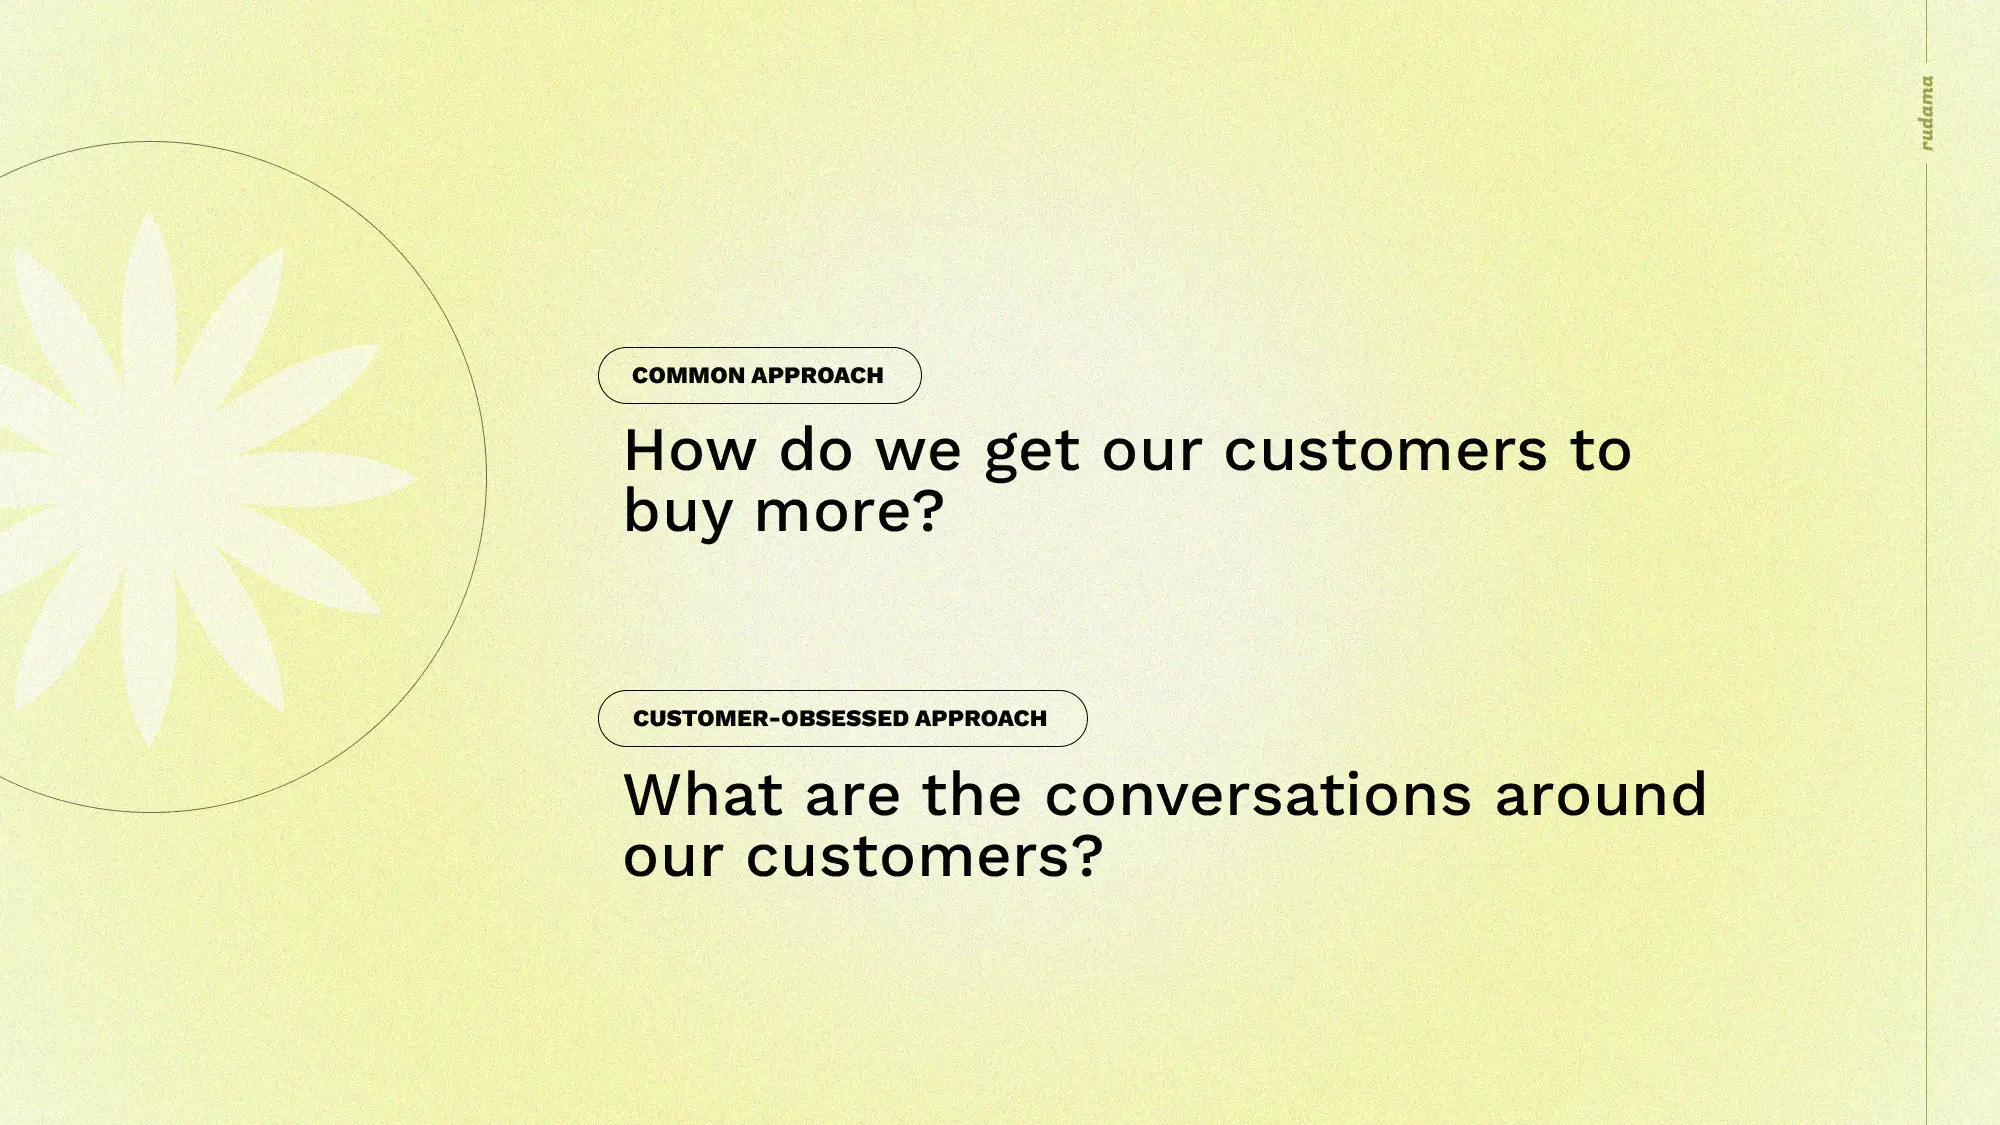 Ask what are the conversations around your customers instead